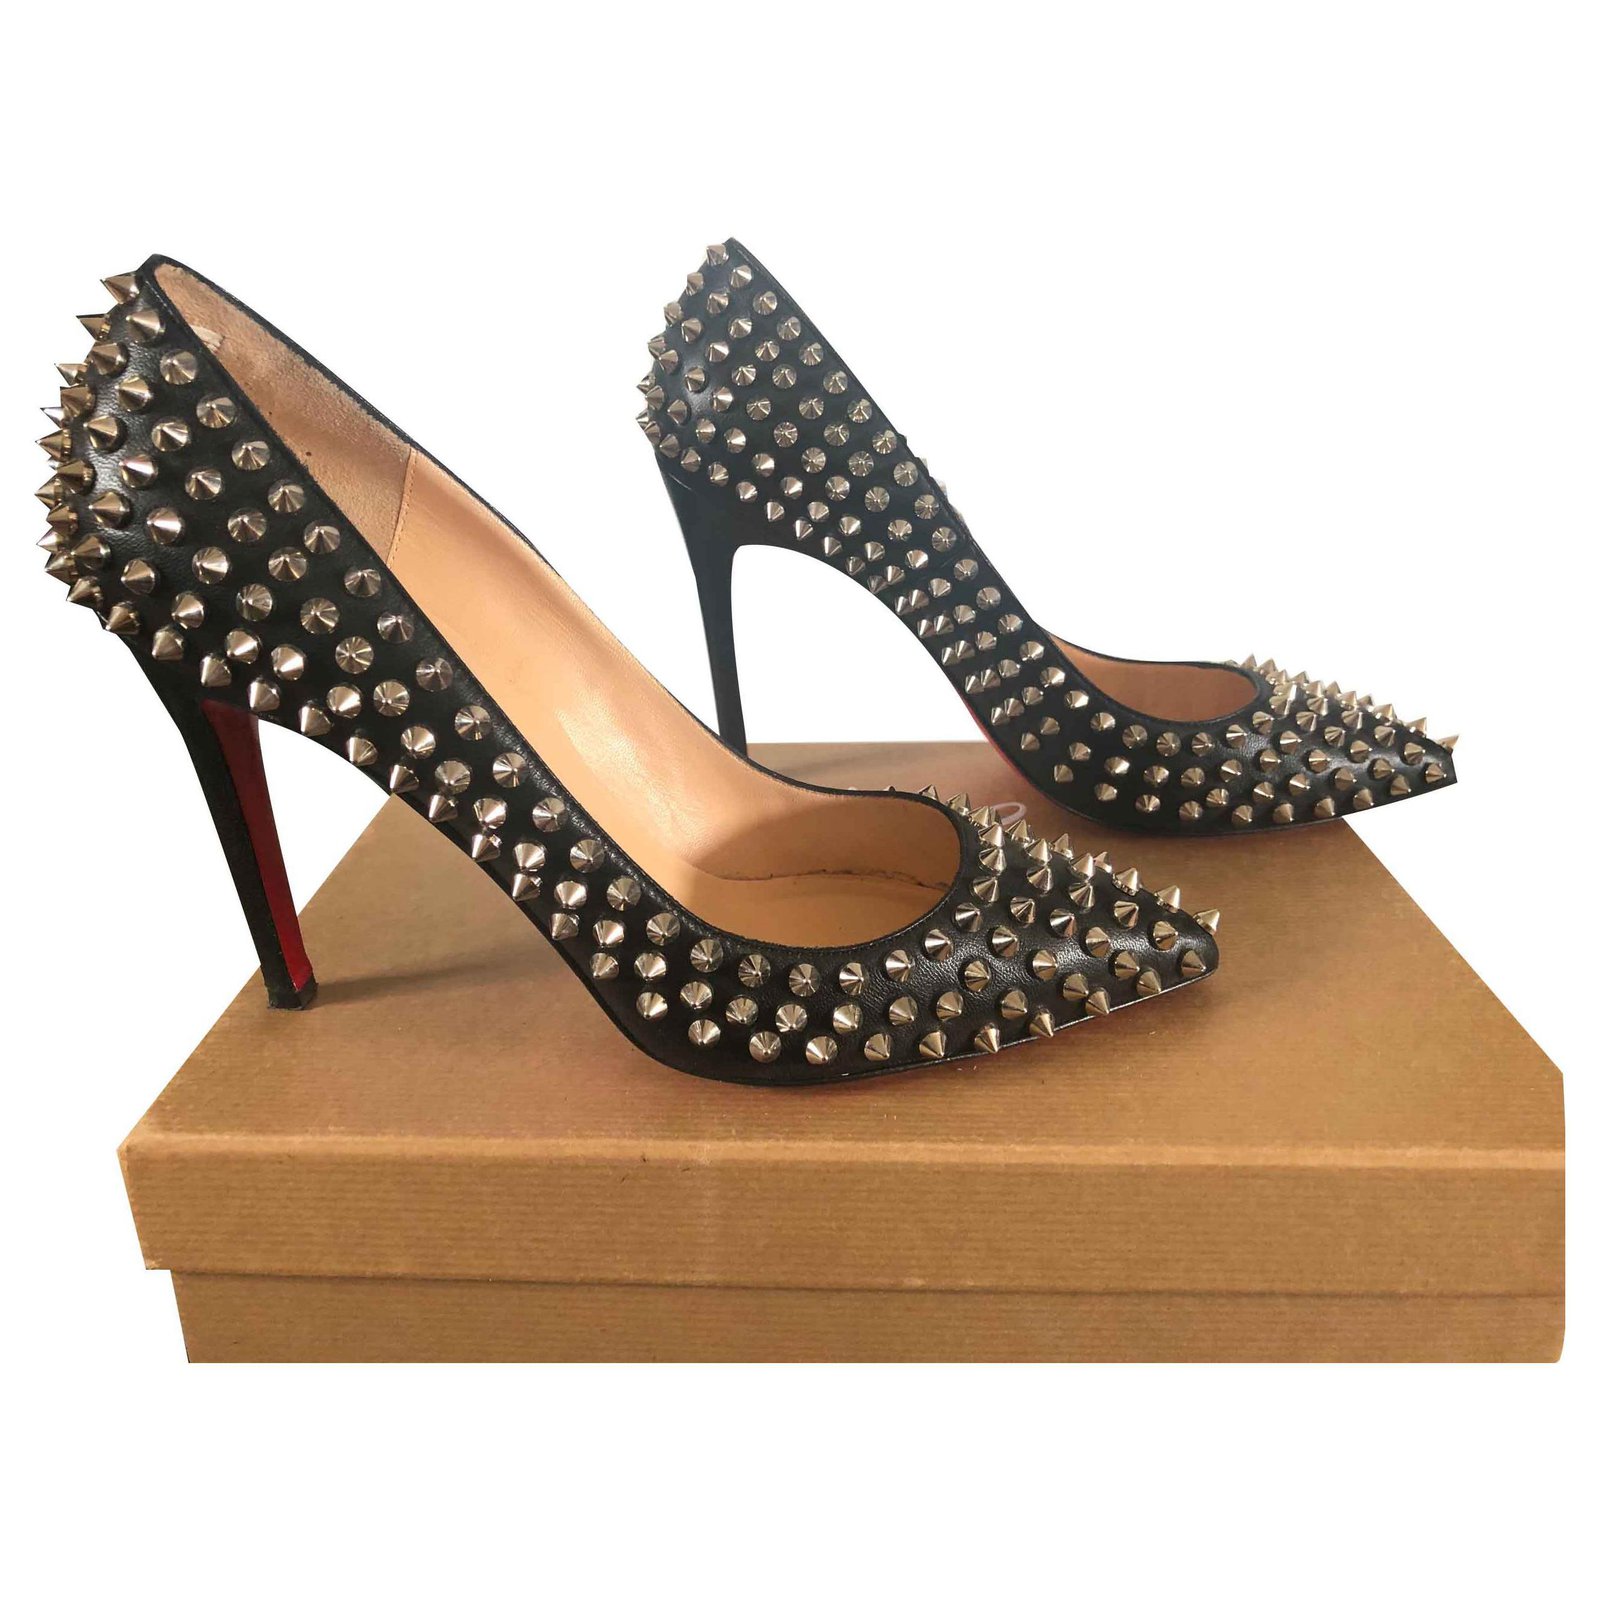 louboutin spiked pigalle